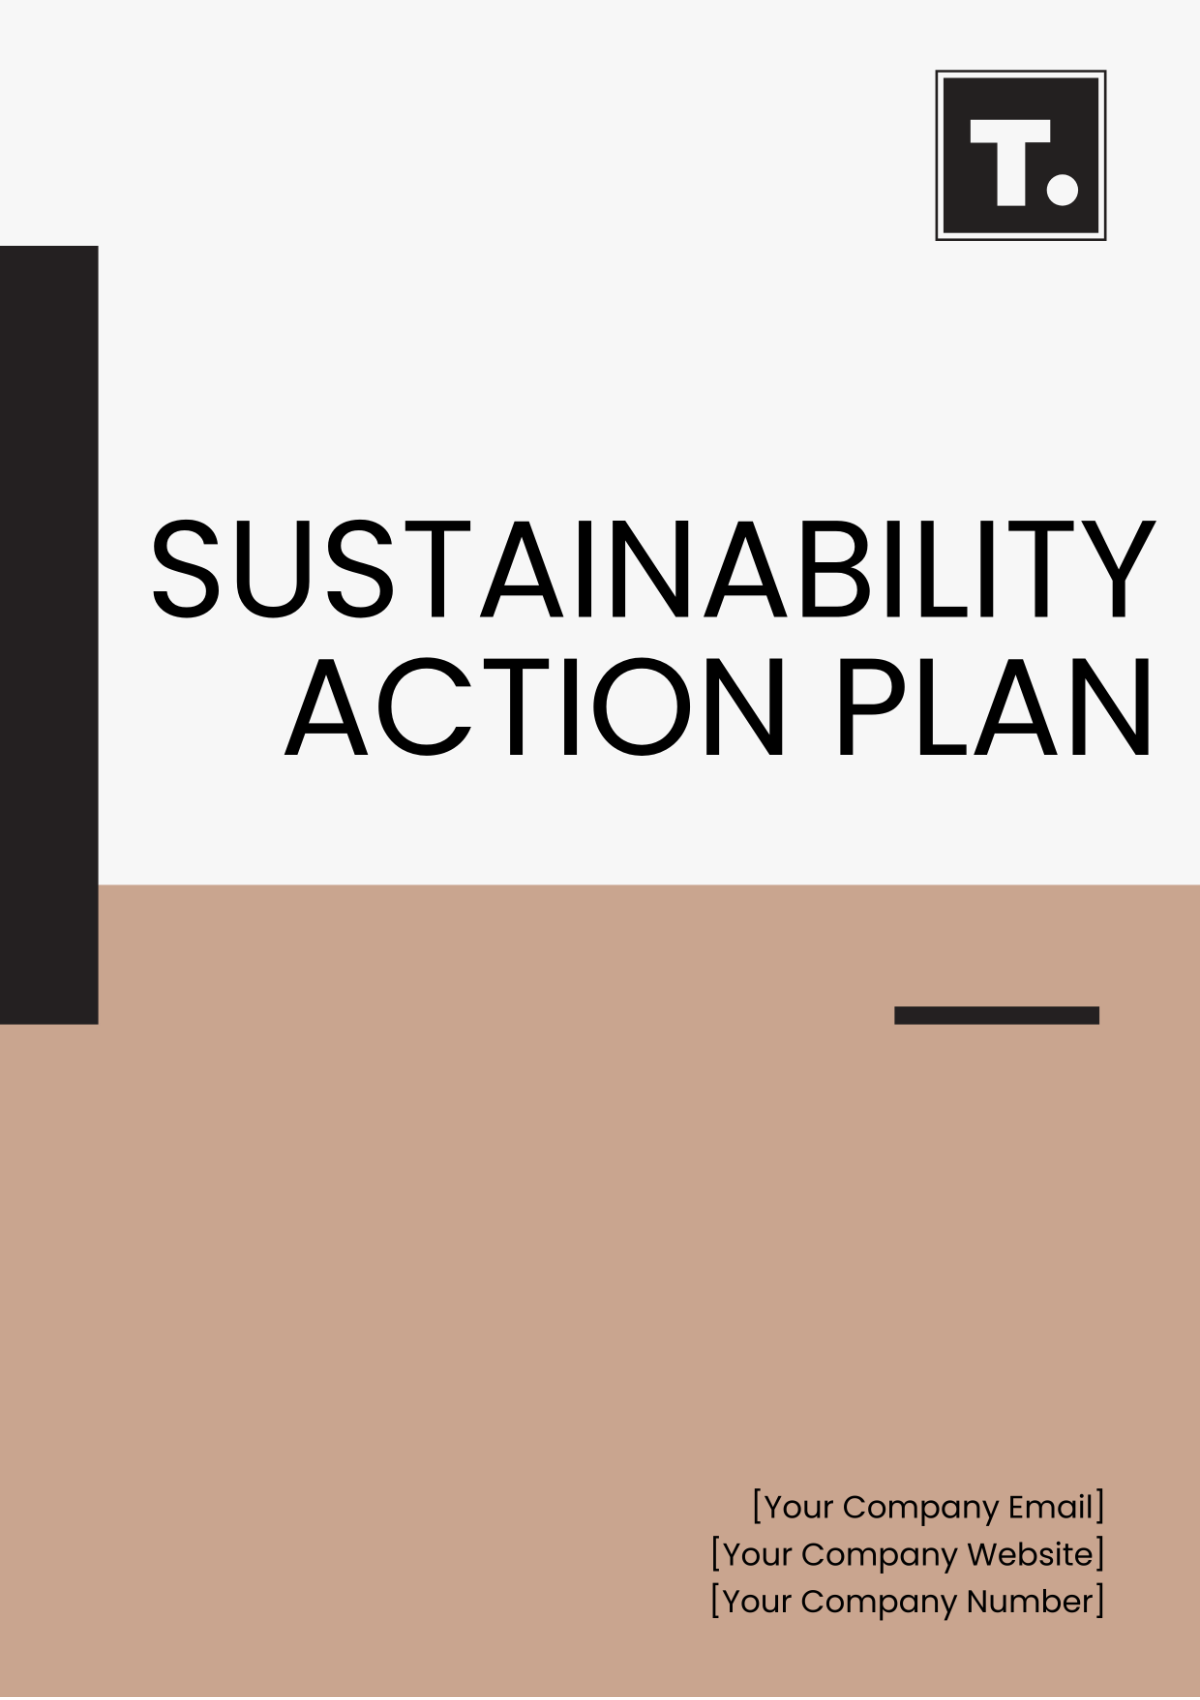 Free Sustainability Action Plan Template